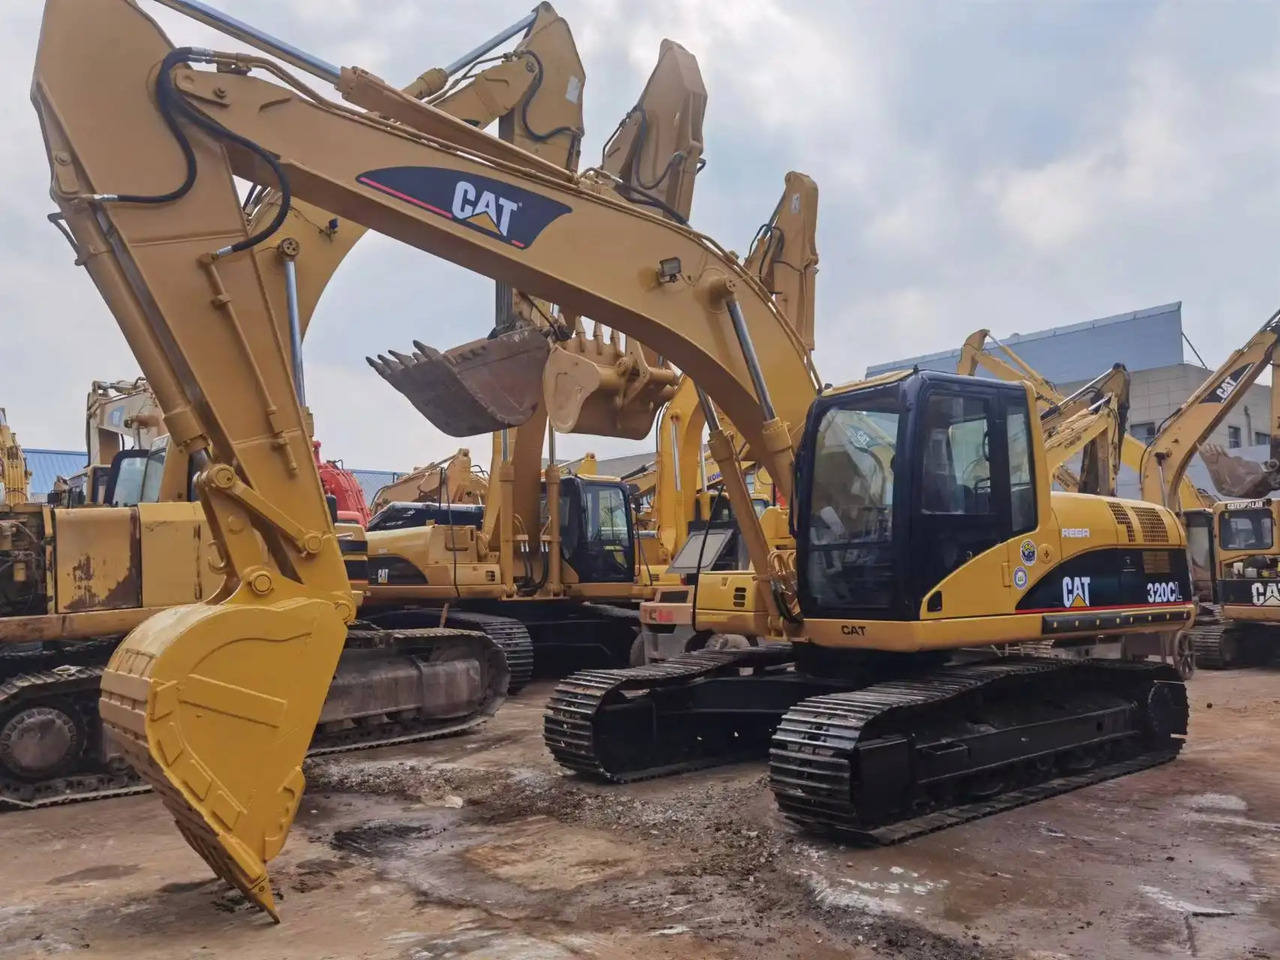 Rupsgraafmachine Hot Sale Cat/caterpillar Excavator 320c,320cl Made In Japan/usa With Cheap Price in Shanghai: afbeelding 7